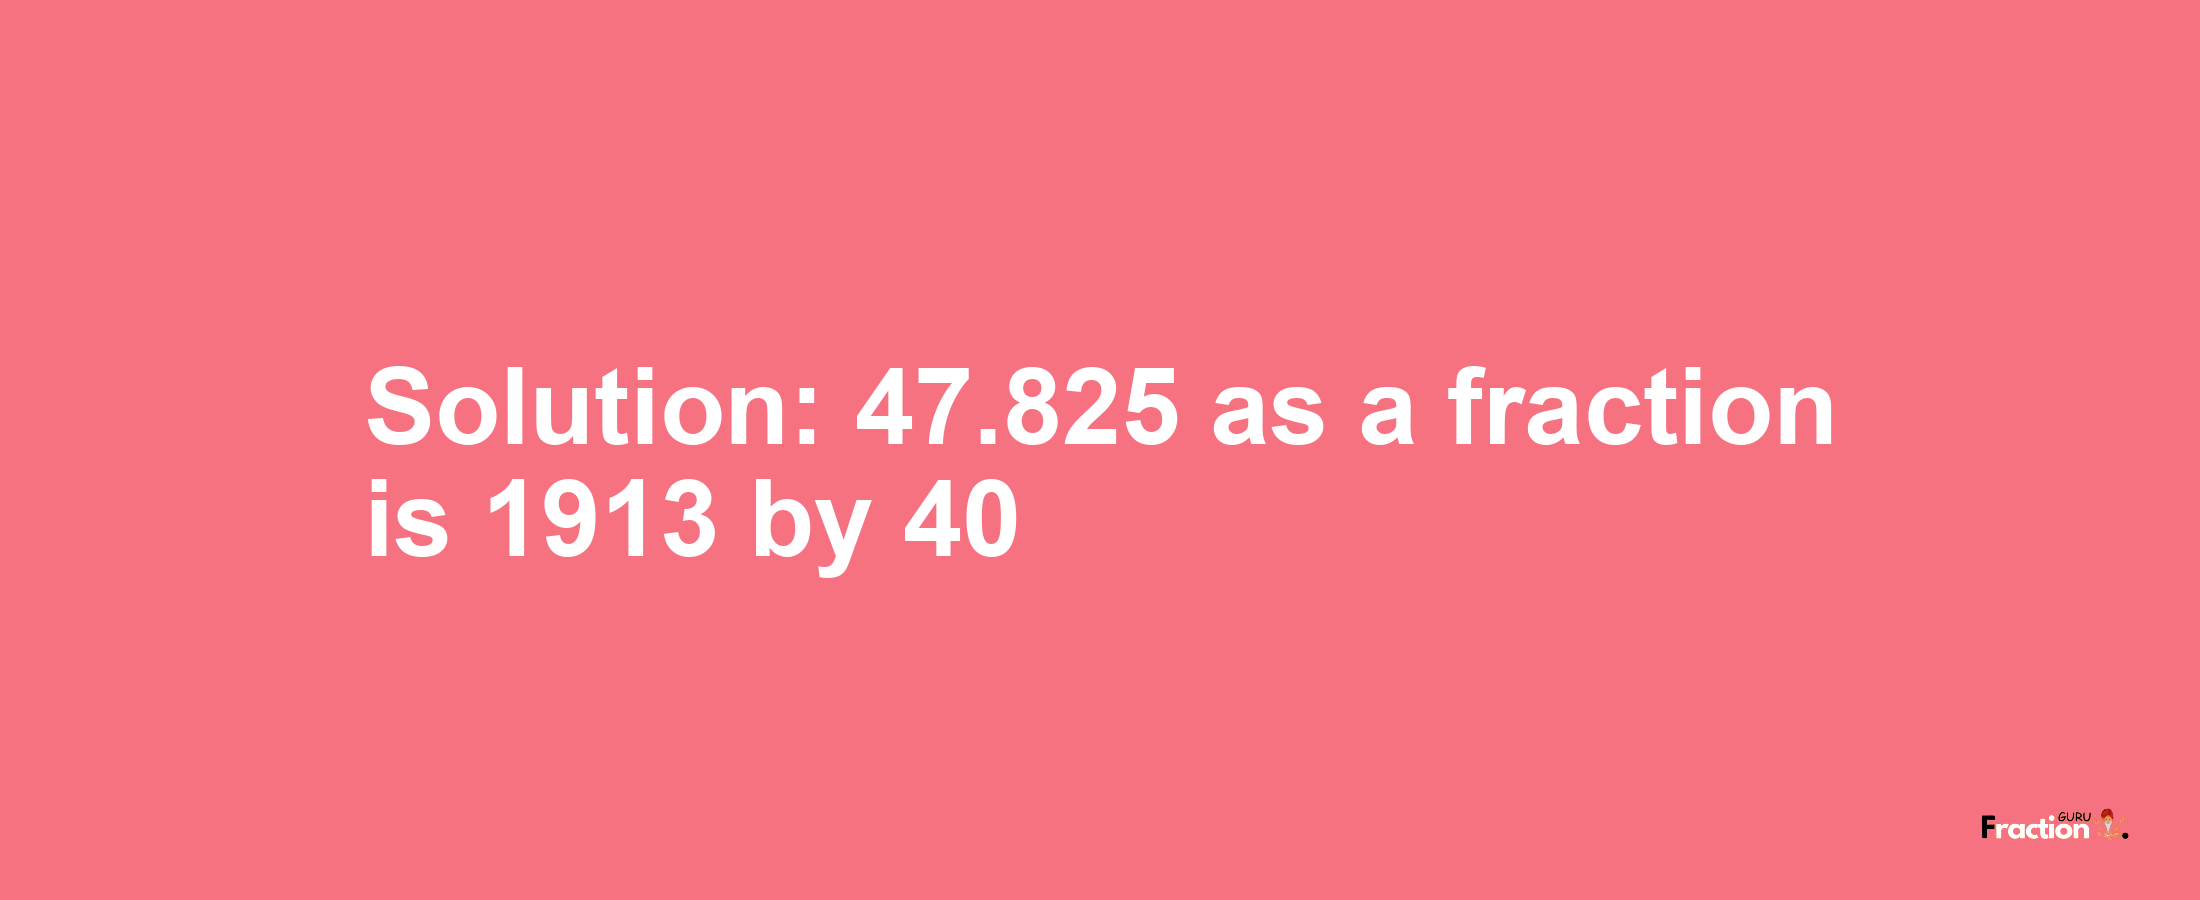 Solution:47.825 as a fraction is 1913/40